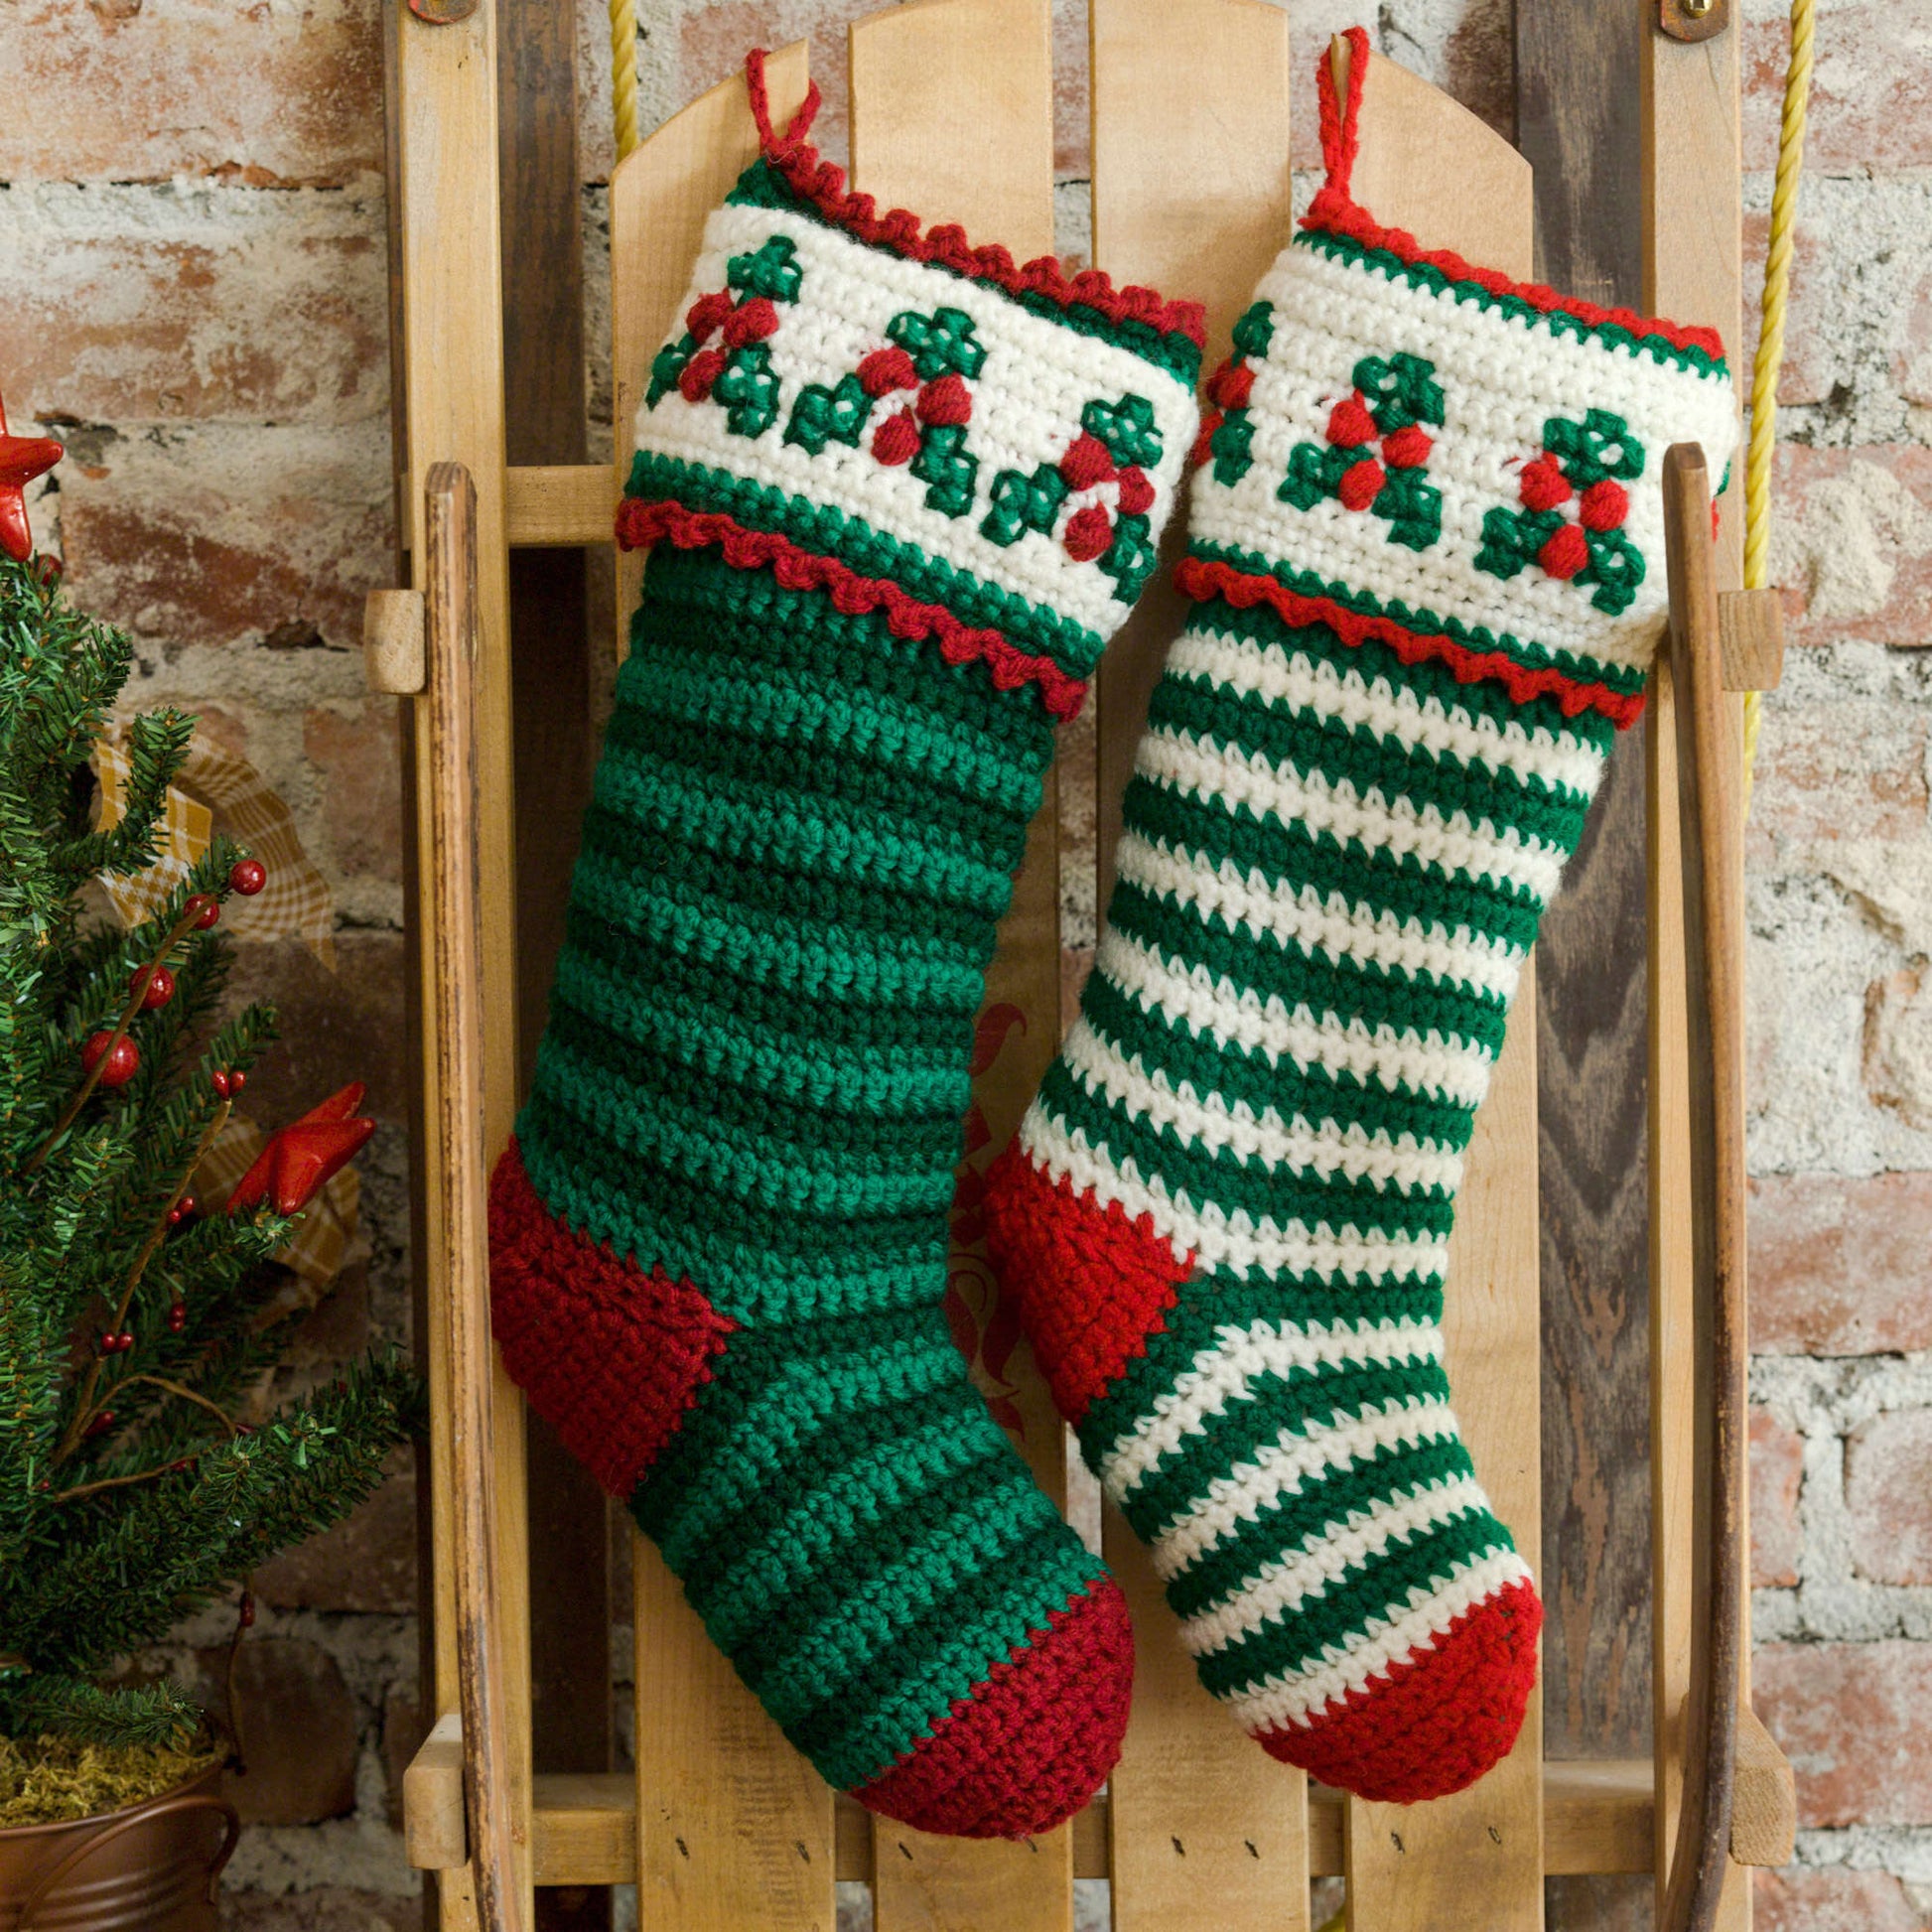 Free Red Heart Crochet Holly & Berry Stockings Pattern